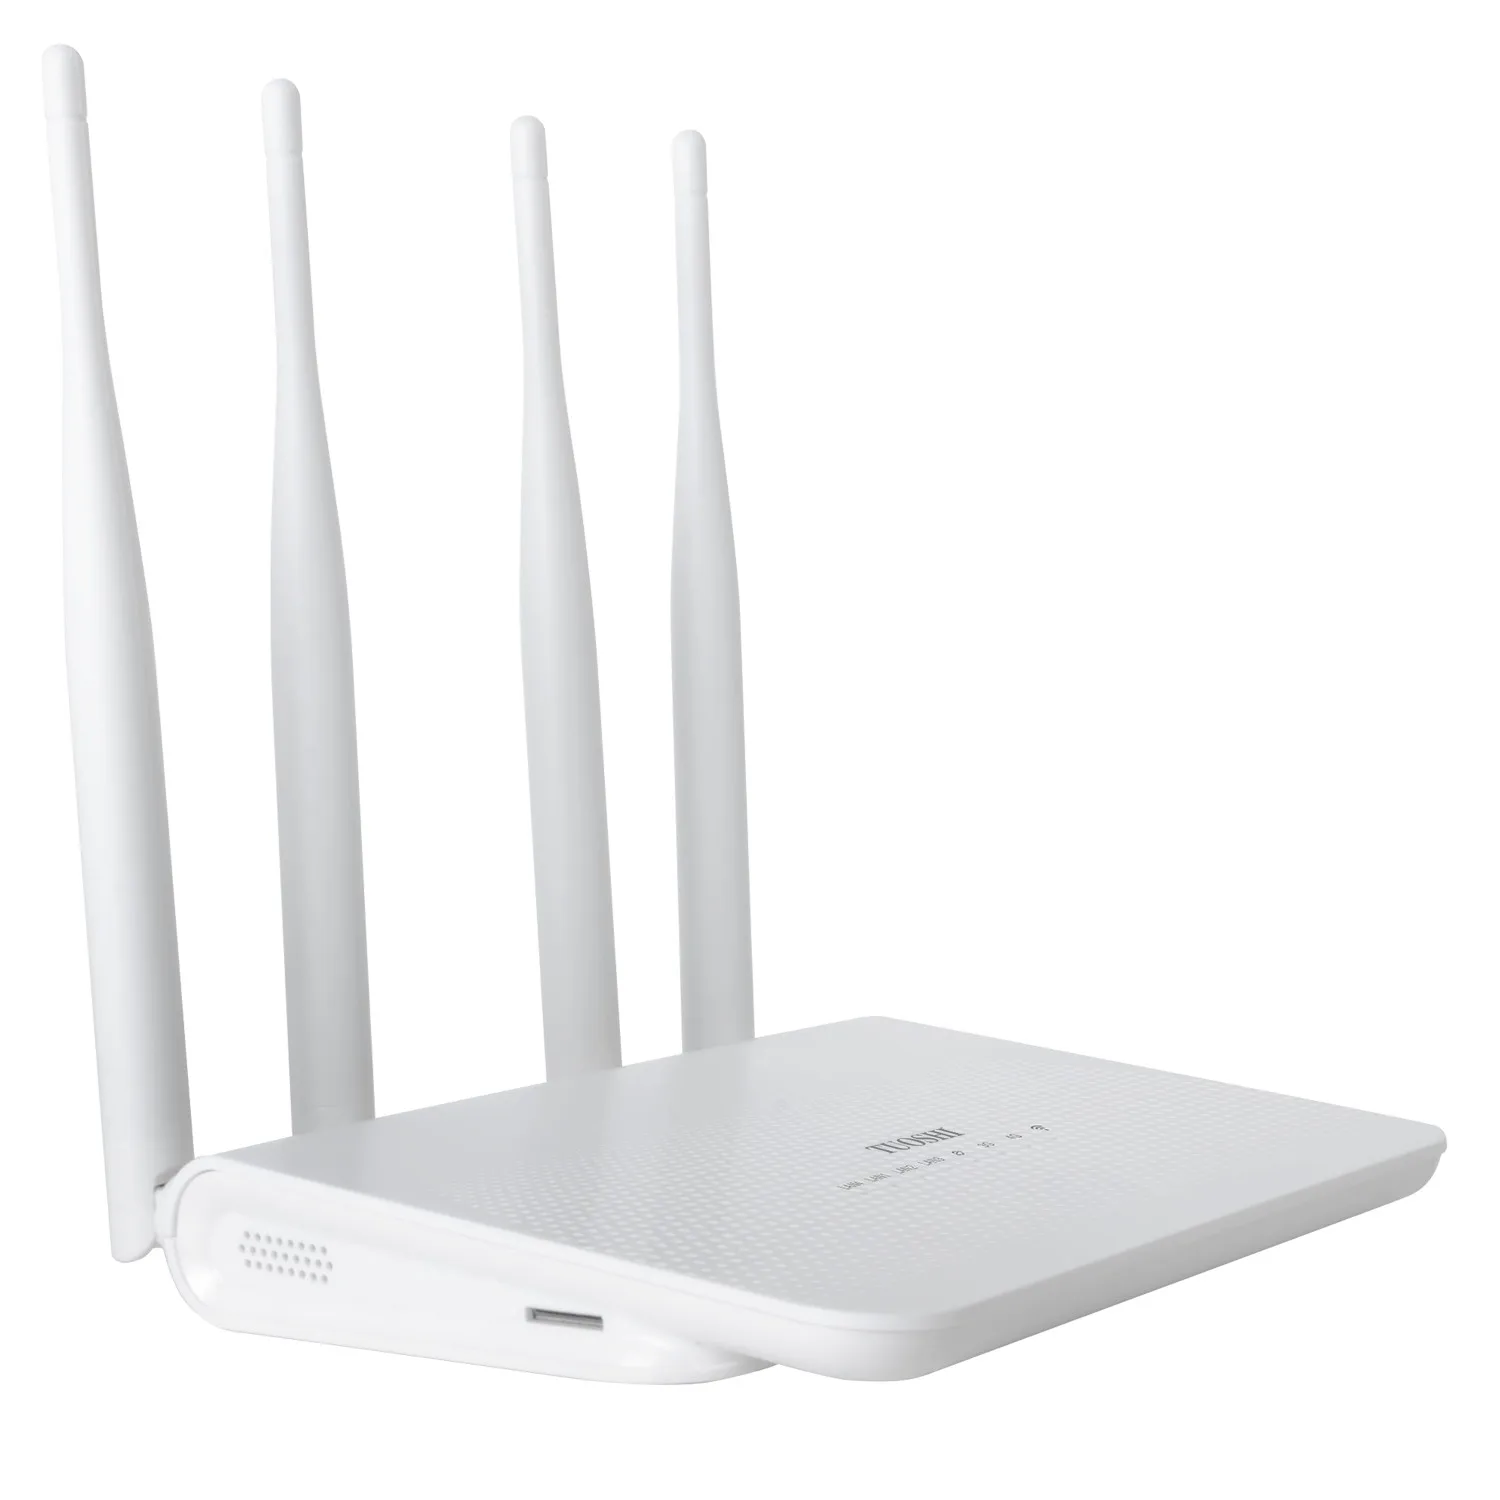 

OEM Outdoor Home 2.4GHz 300Mbps WiFi GSM 4G LTE Wireless Router Hotpot wifi signal router with SIM Card Slot 4 Antennas